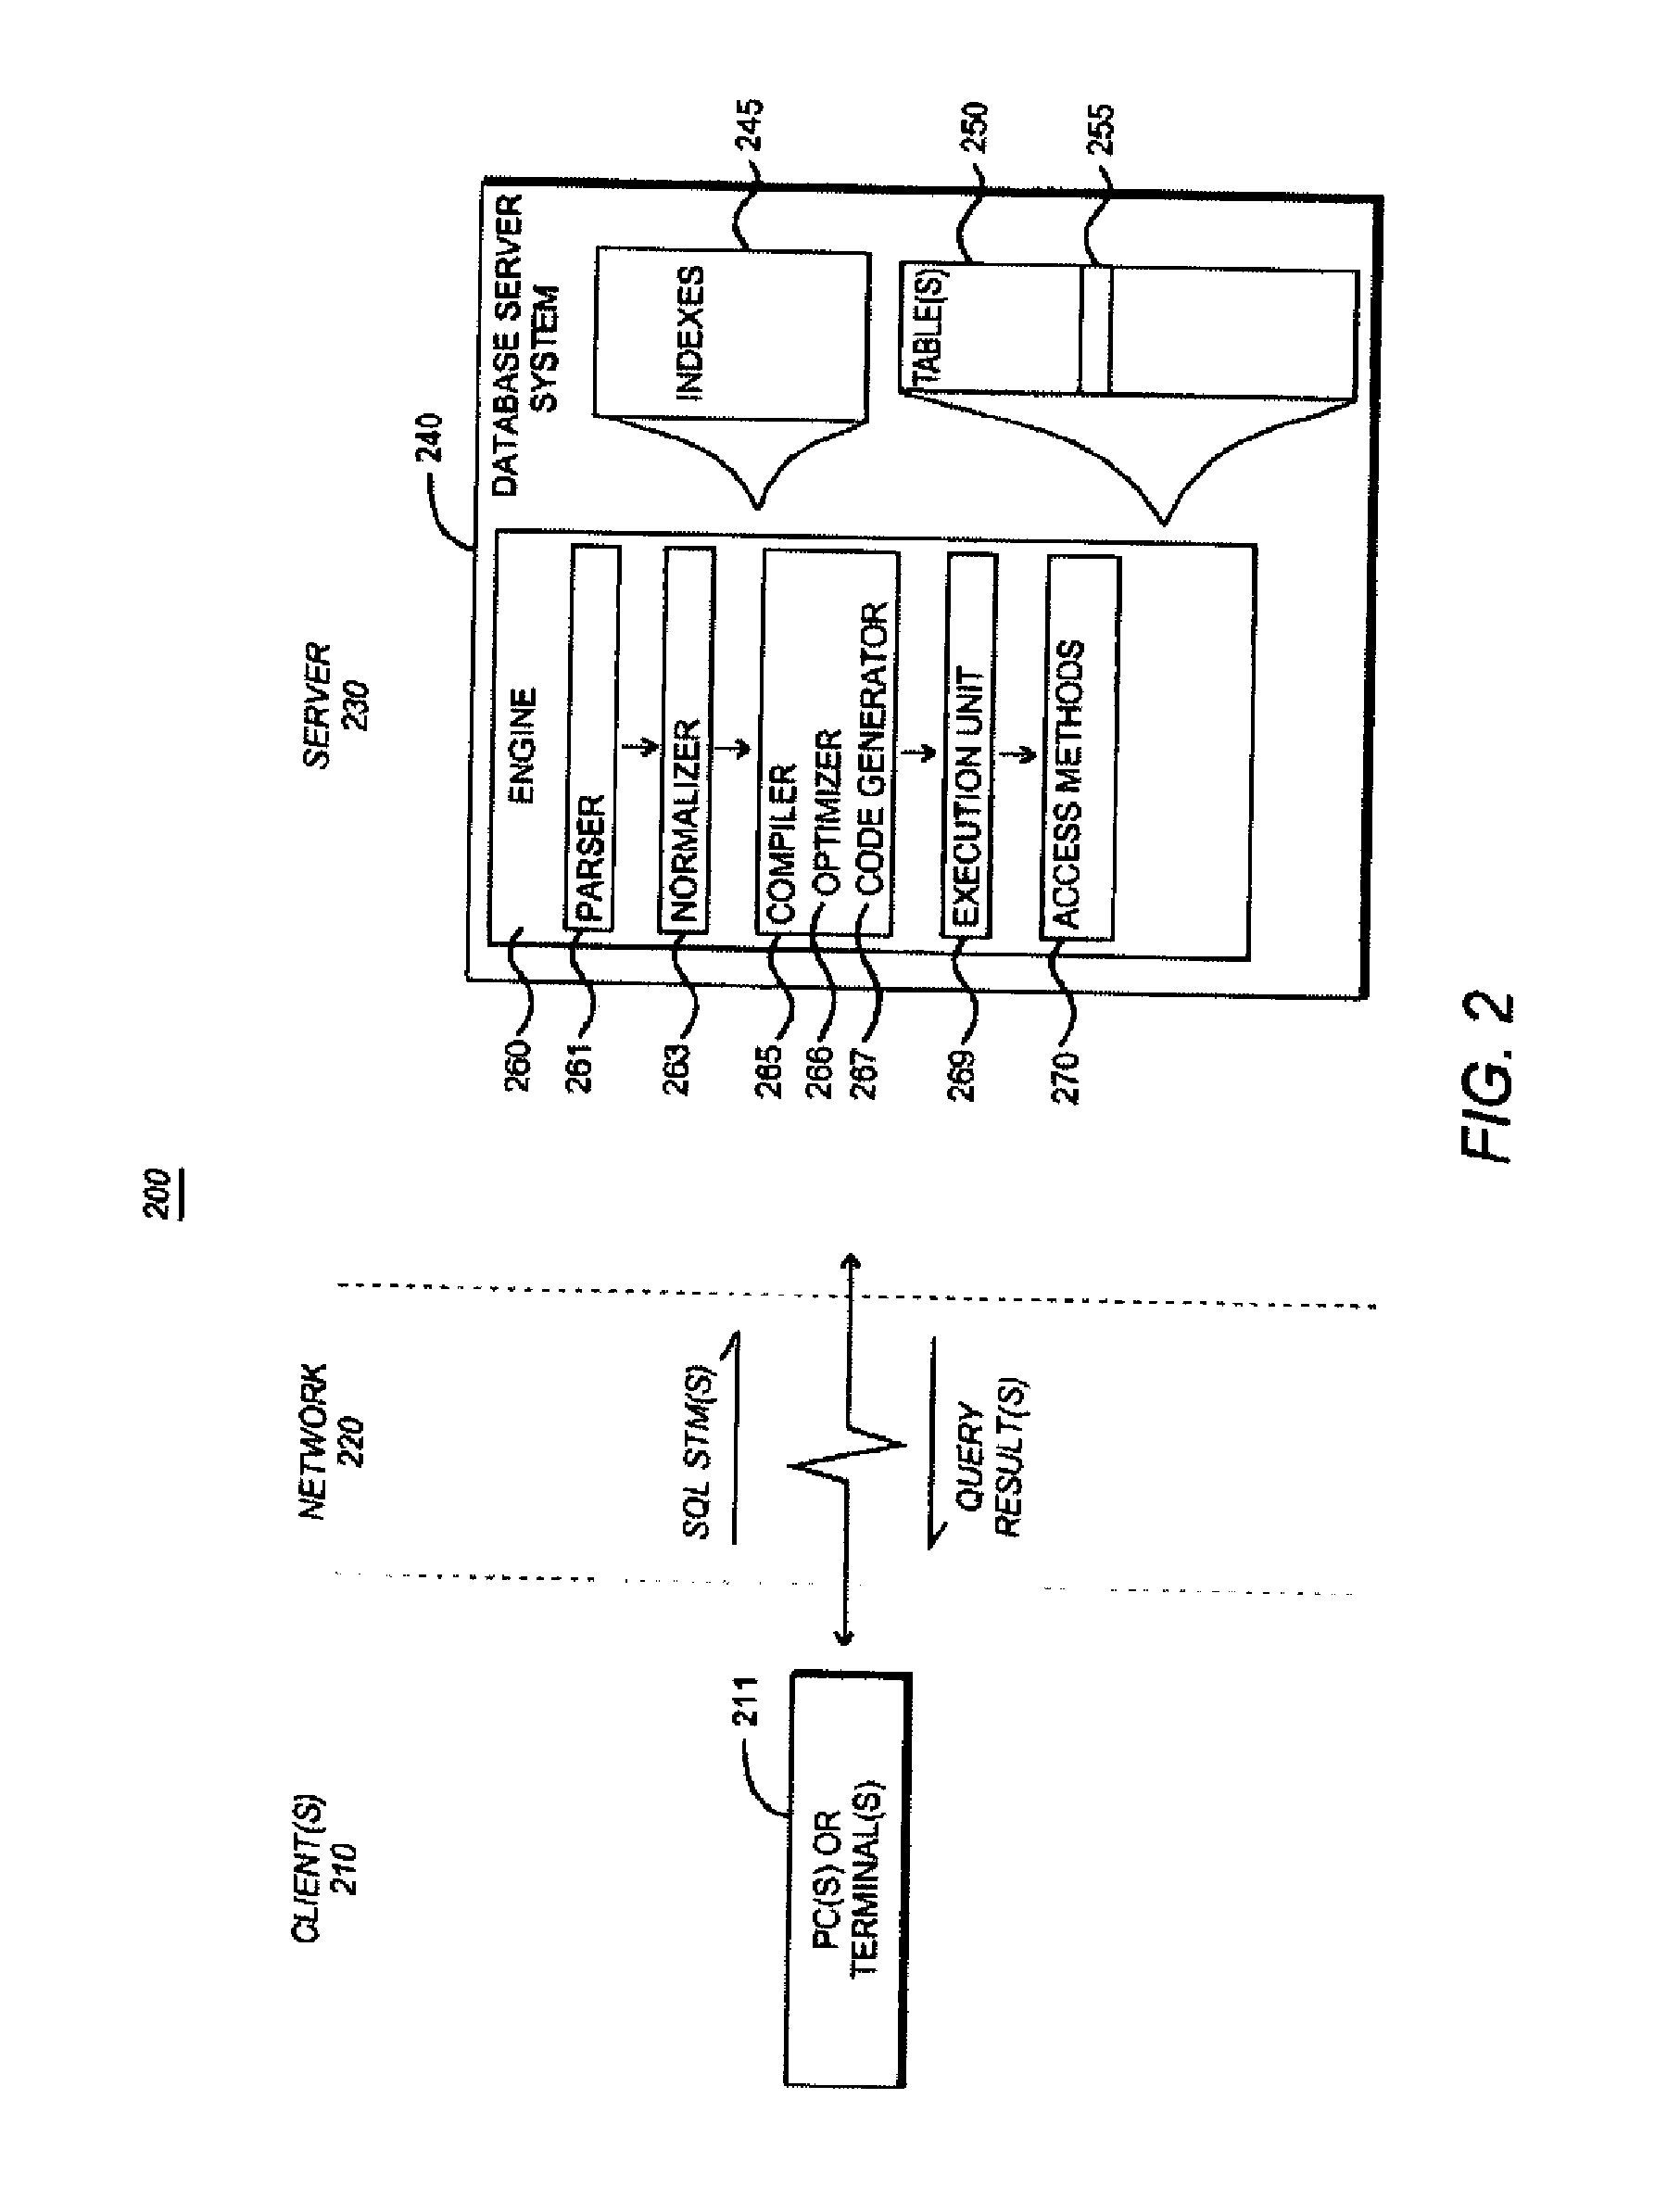 Managing Data Storage as an In-Memory Database in a Database Management System